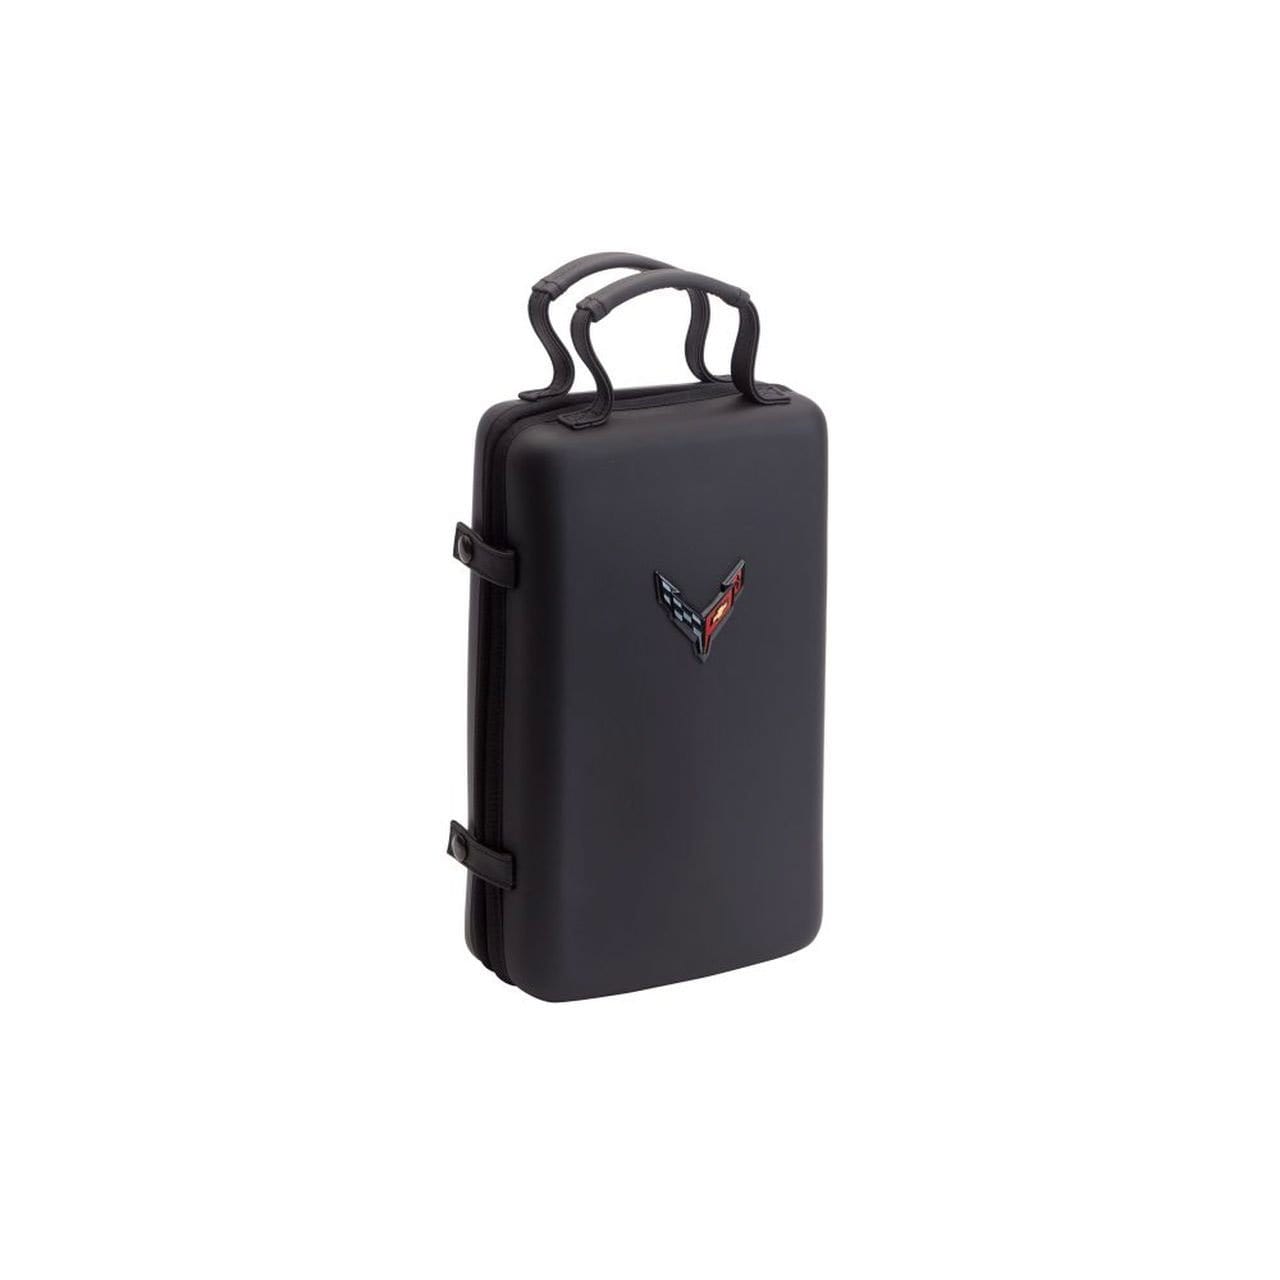 Genuine Chevrolet Collapsible Cargo Organizer for C8 Corvette Stingray Frunk, with Crossed Flags logo, SKU 50-4-077.